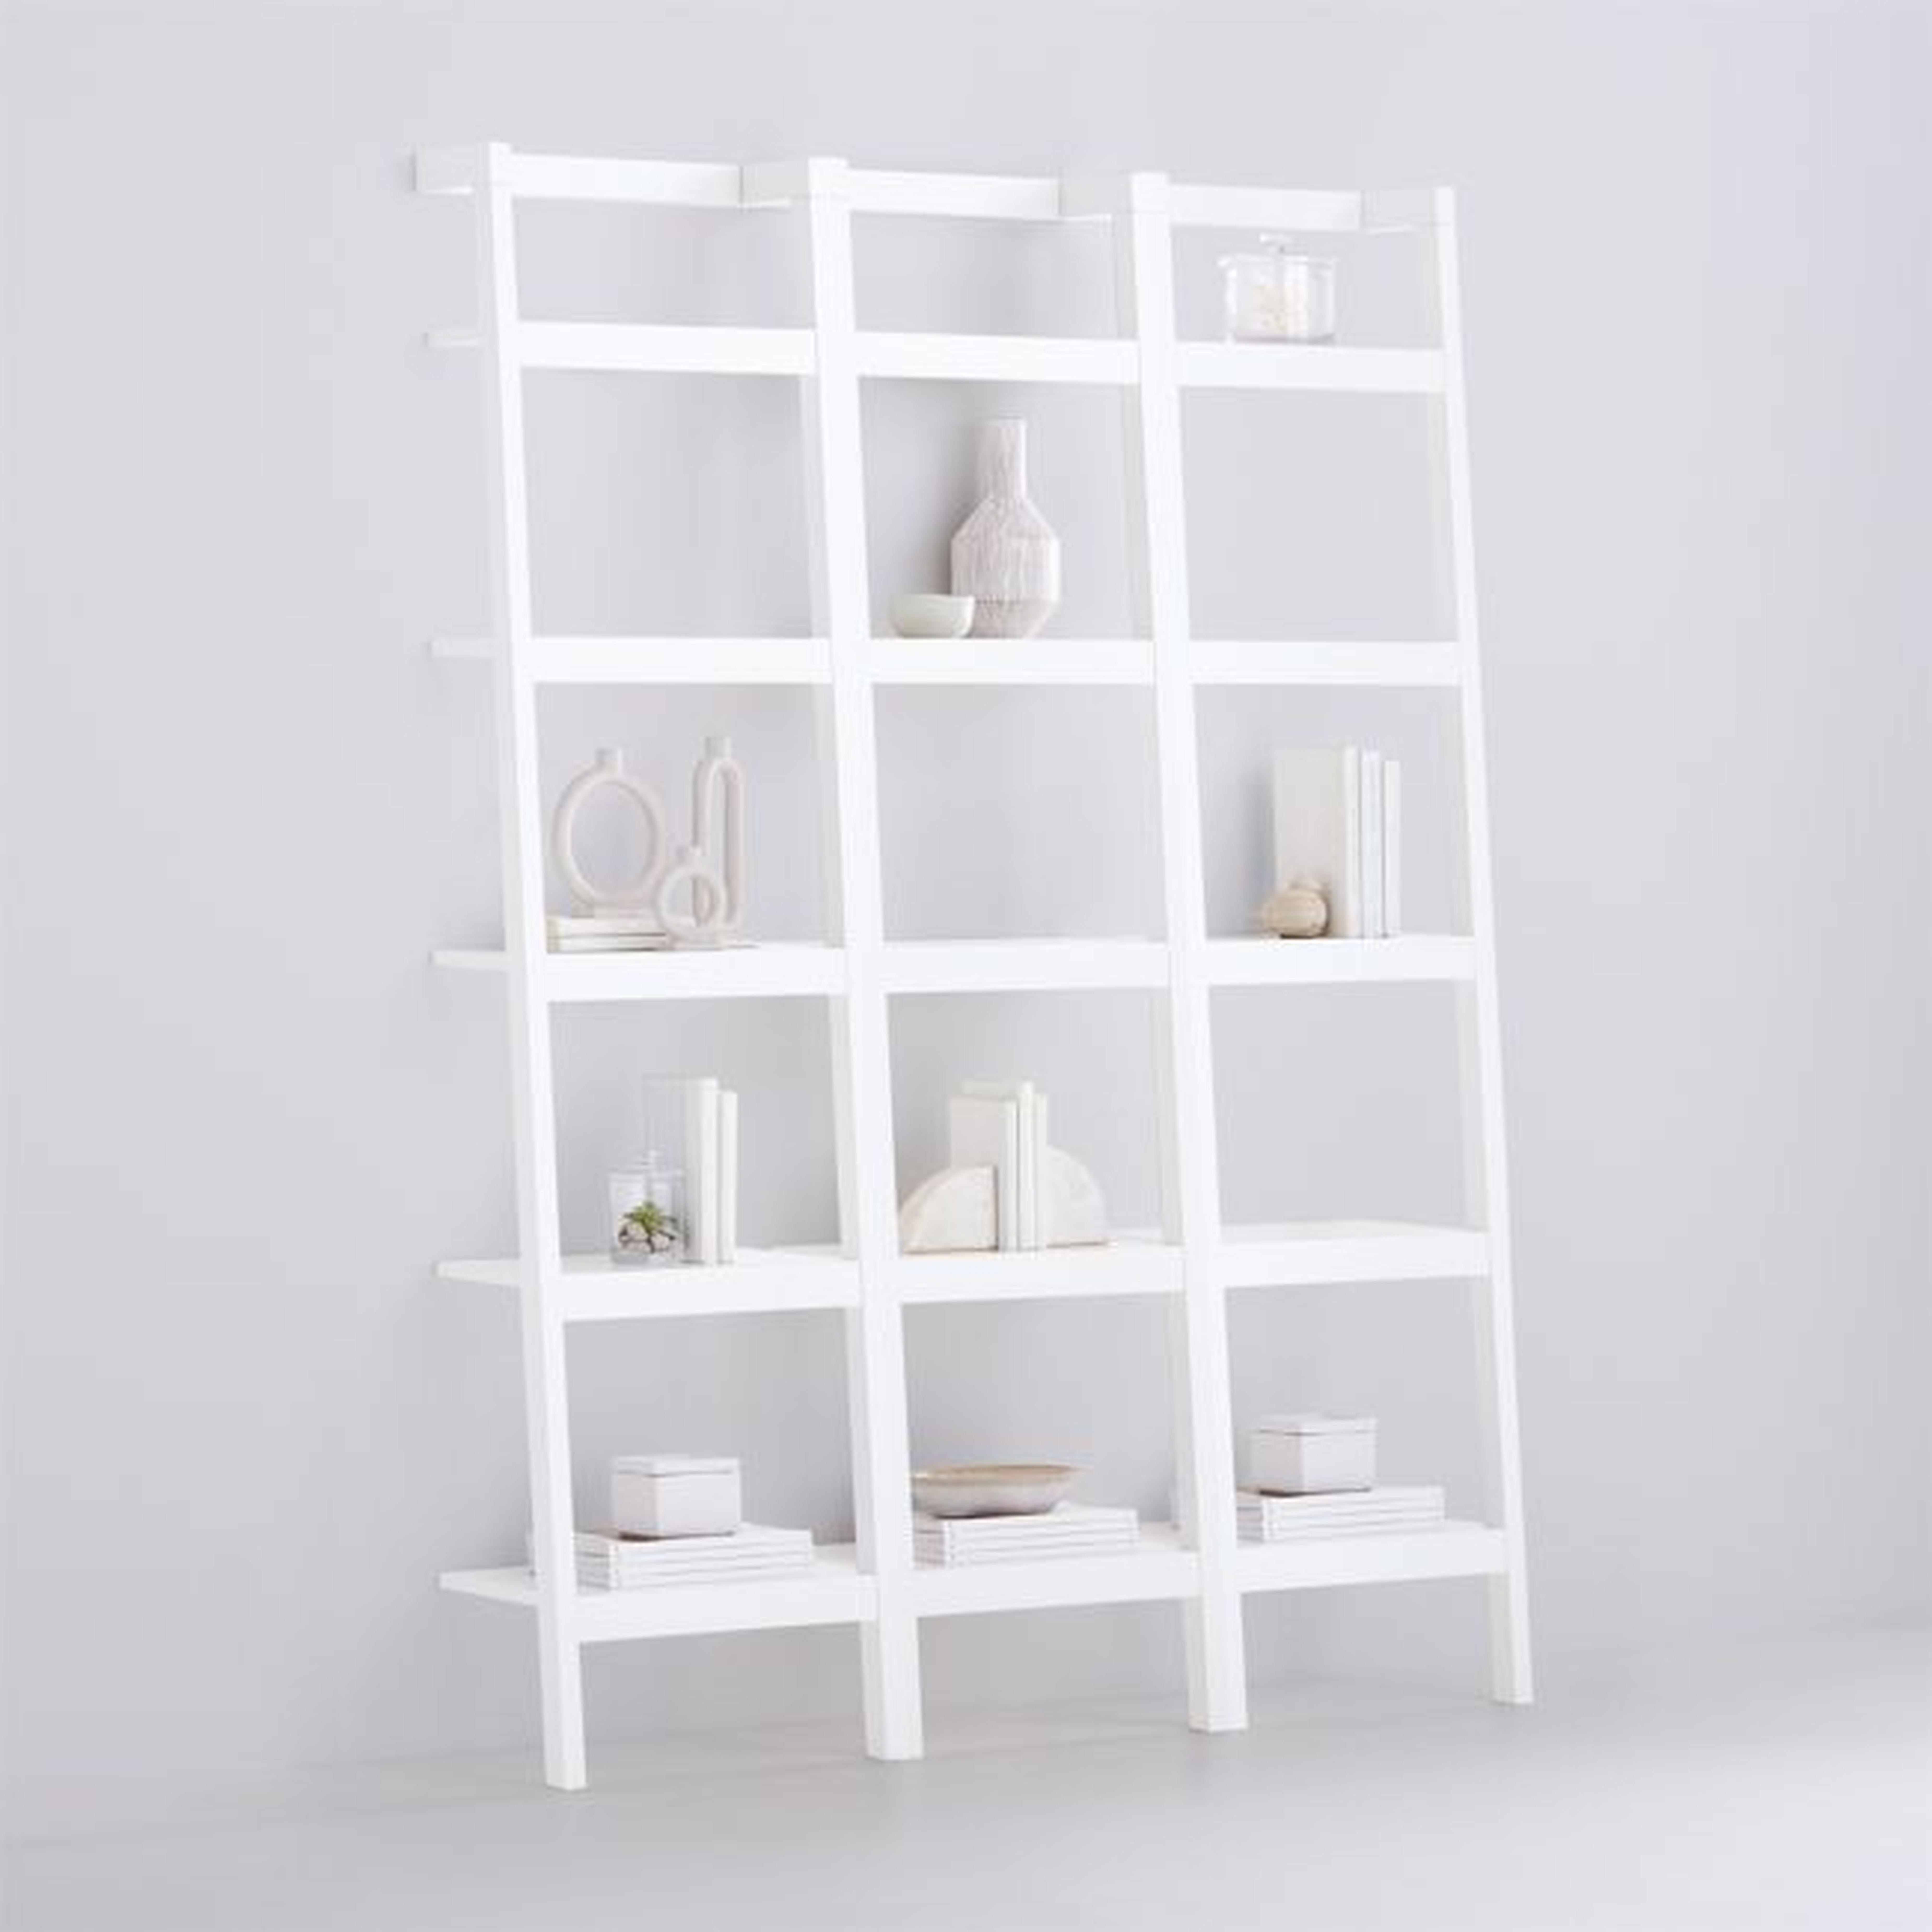 Sawyer White Leaning 18'' Bookcases, Set of 3 - Crate and Barrel